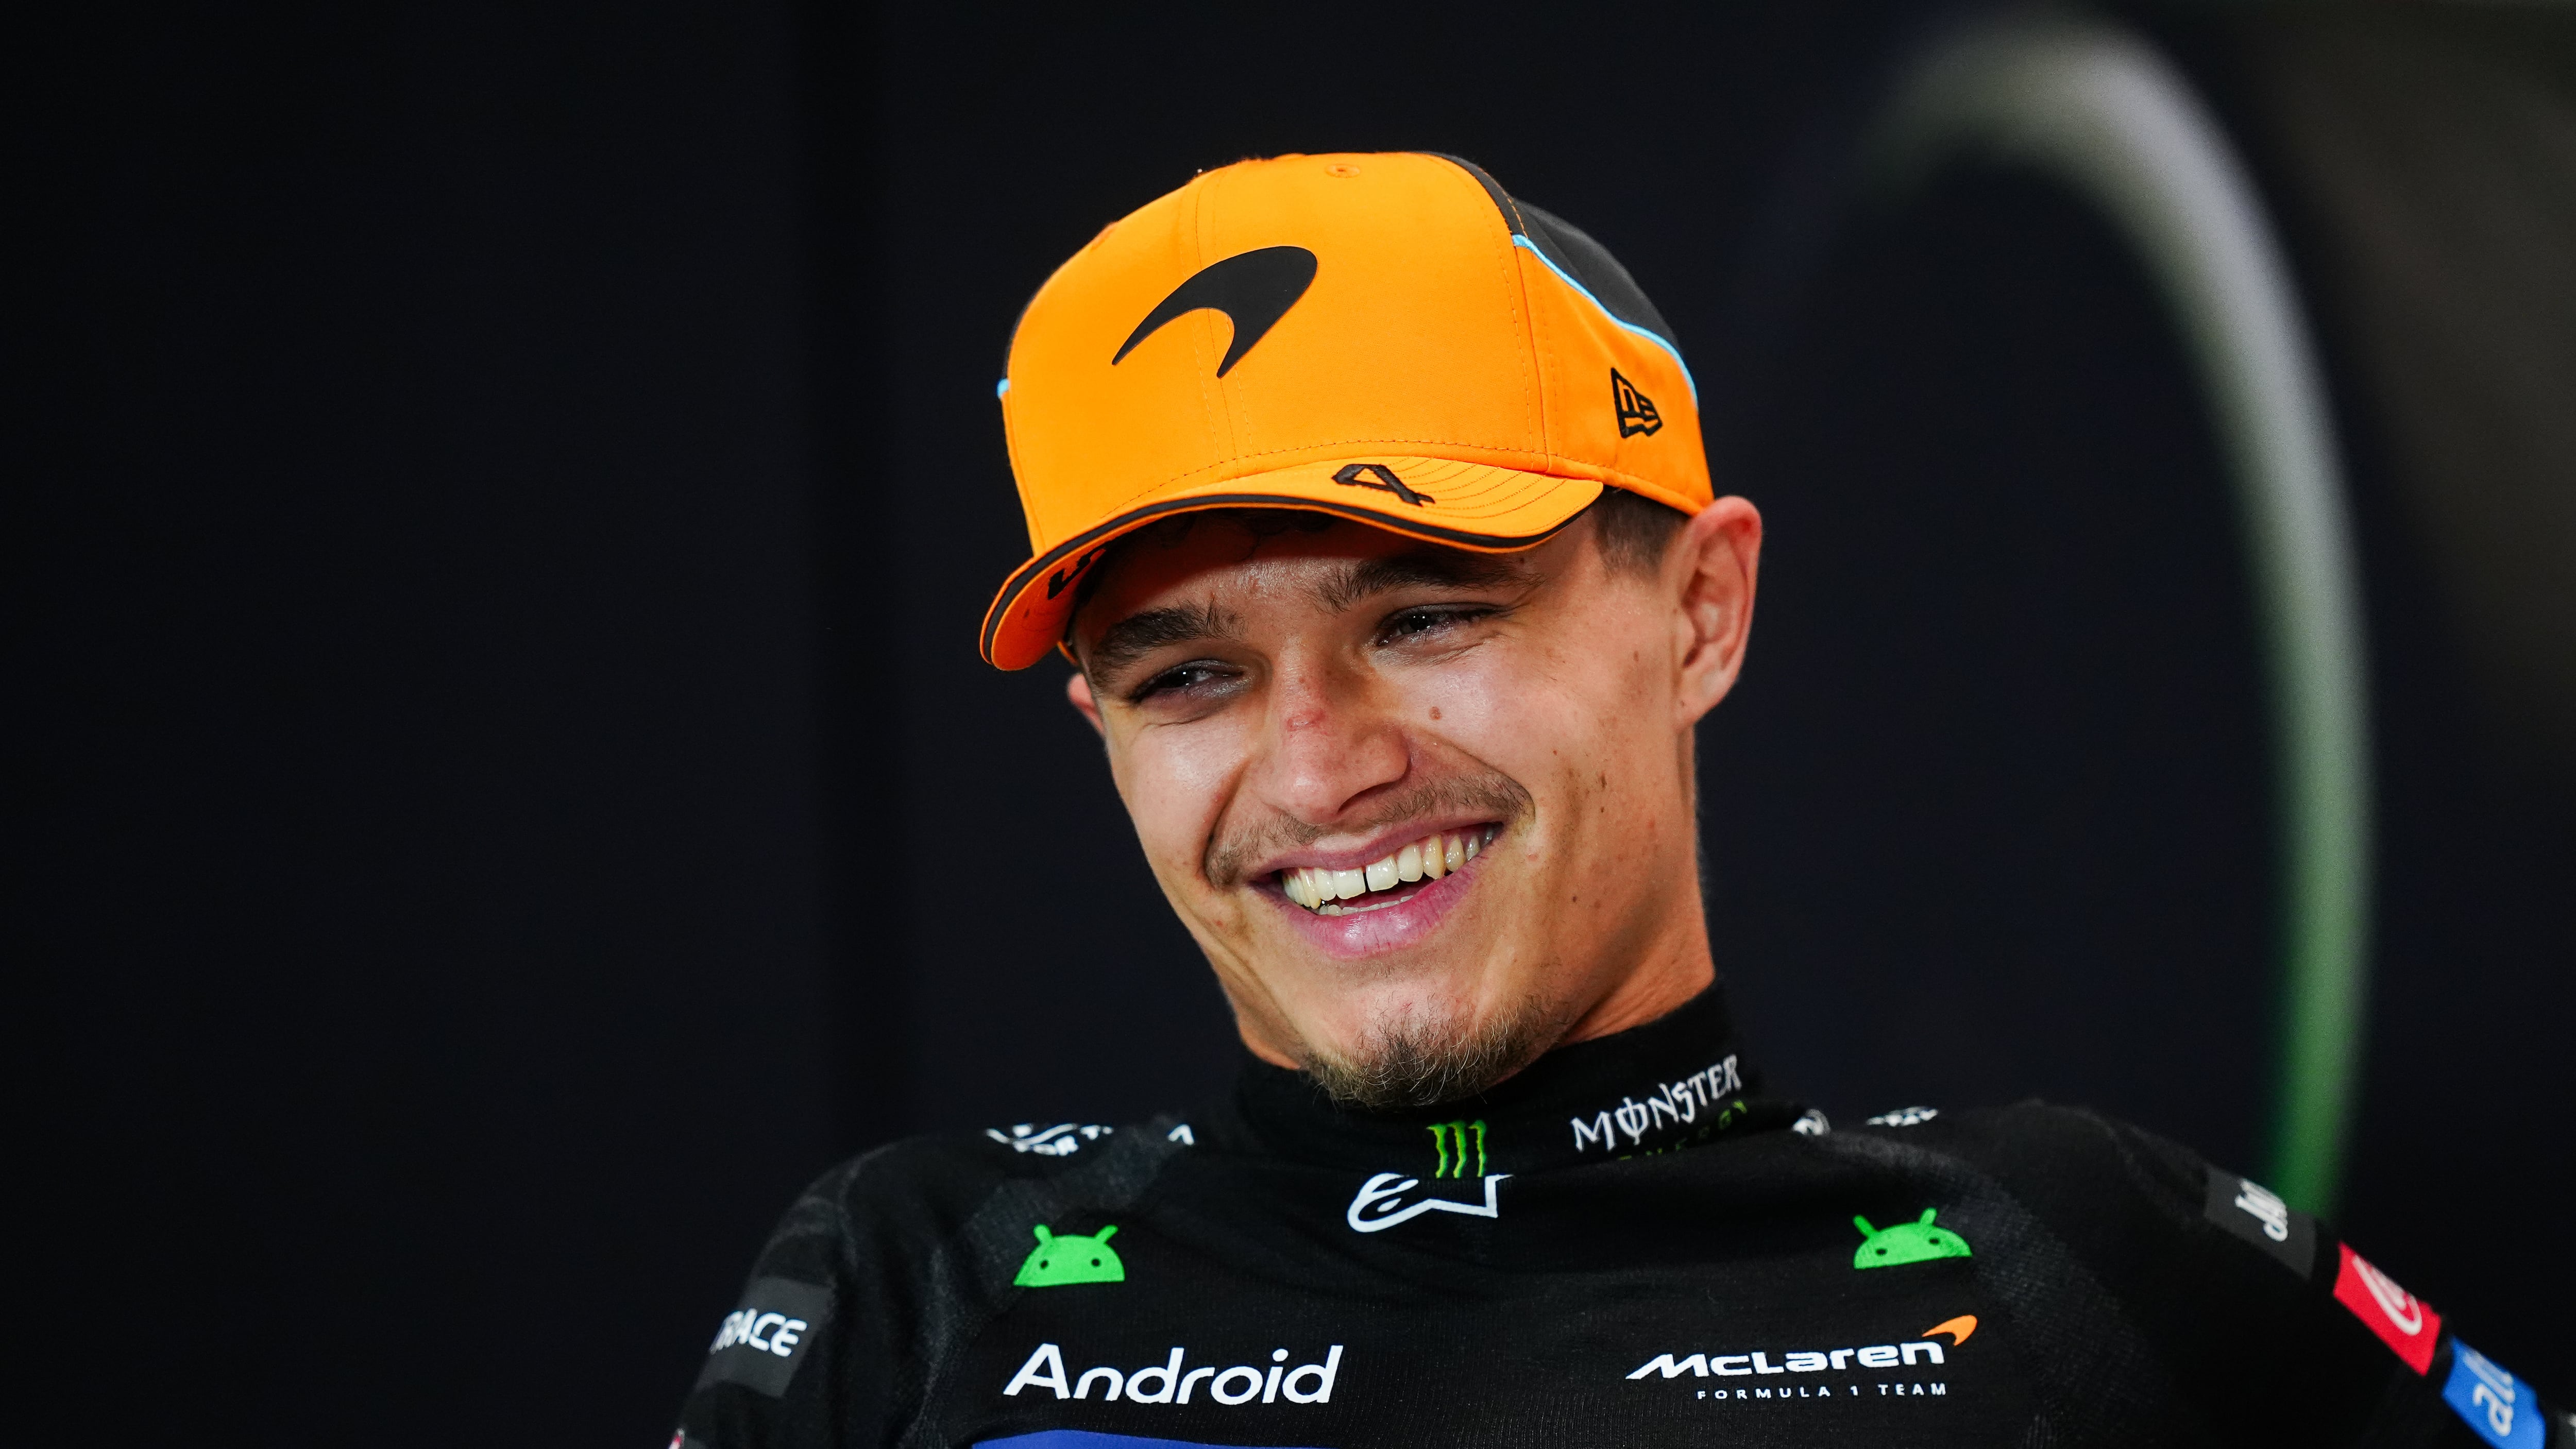 Lando Norris finished fastest in opening practice in Spain